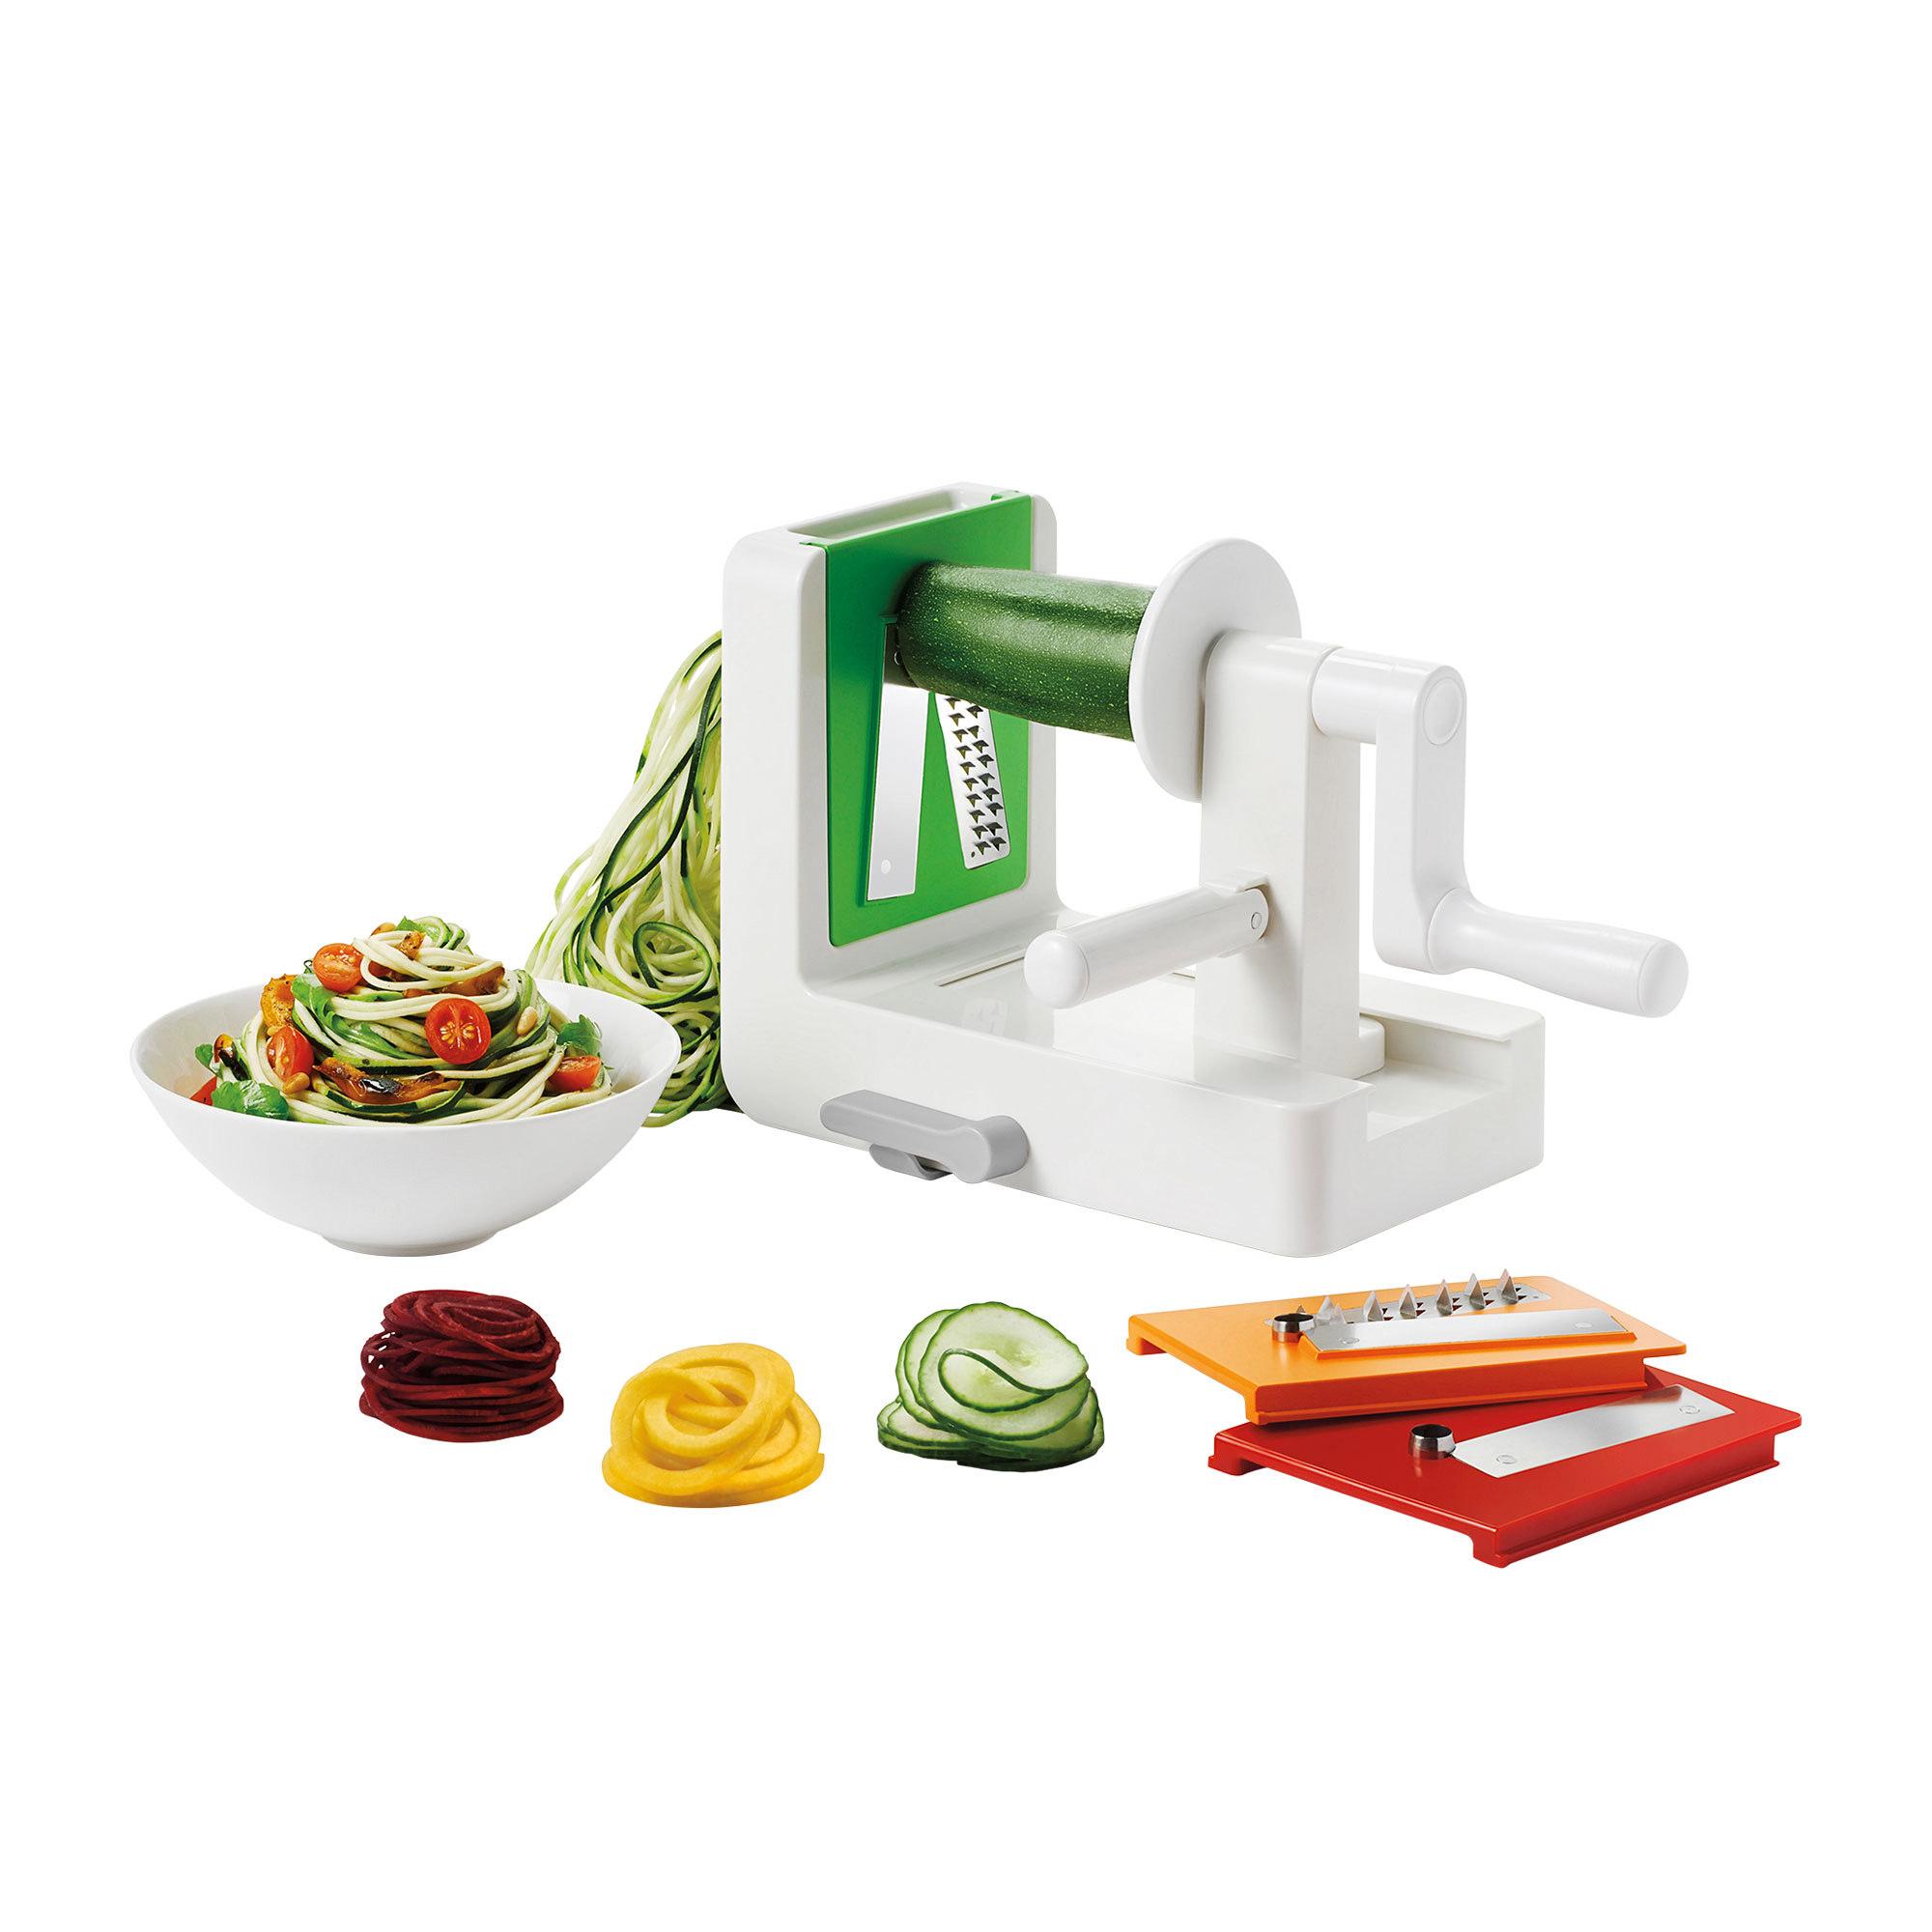 OXO Good Grips Tabletop Spiralizer Image 4